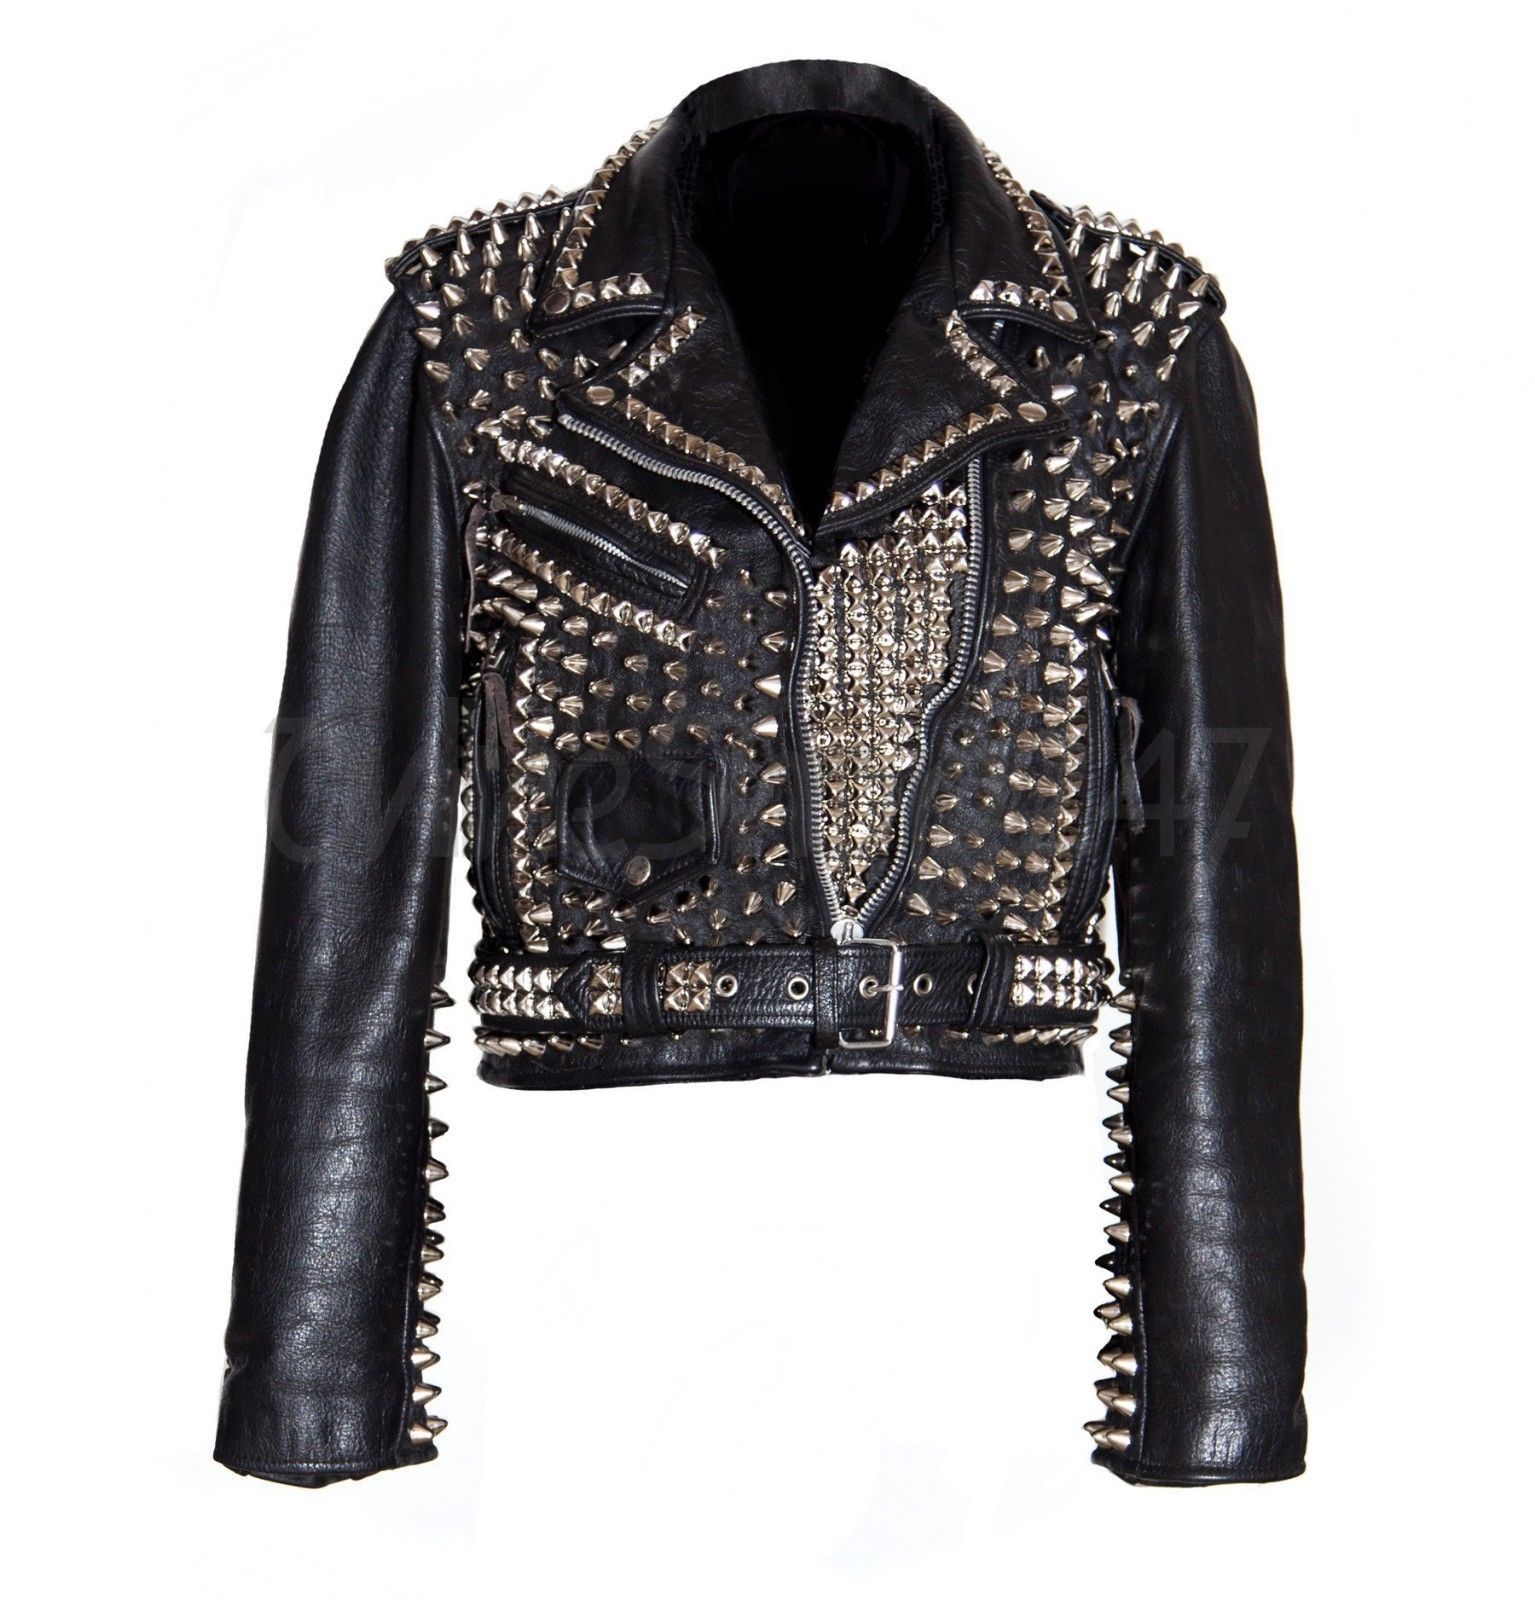 Rocky Style Woman Full Heavy Metal Spiked Studded Brando Black Leather Jacket